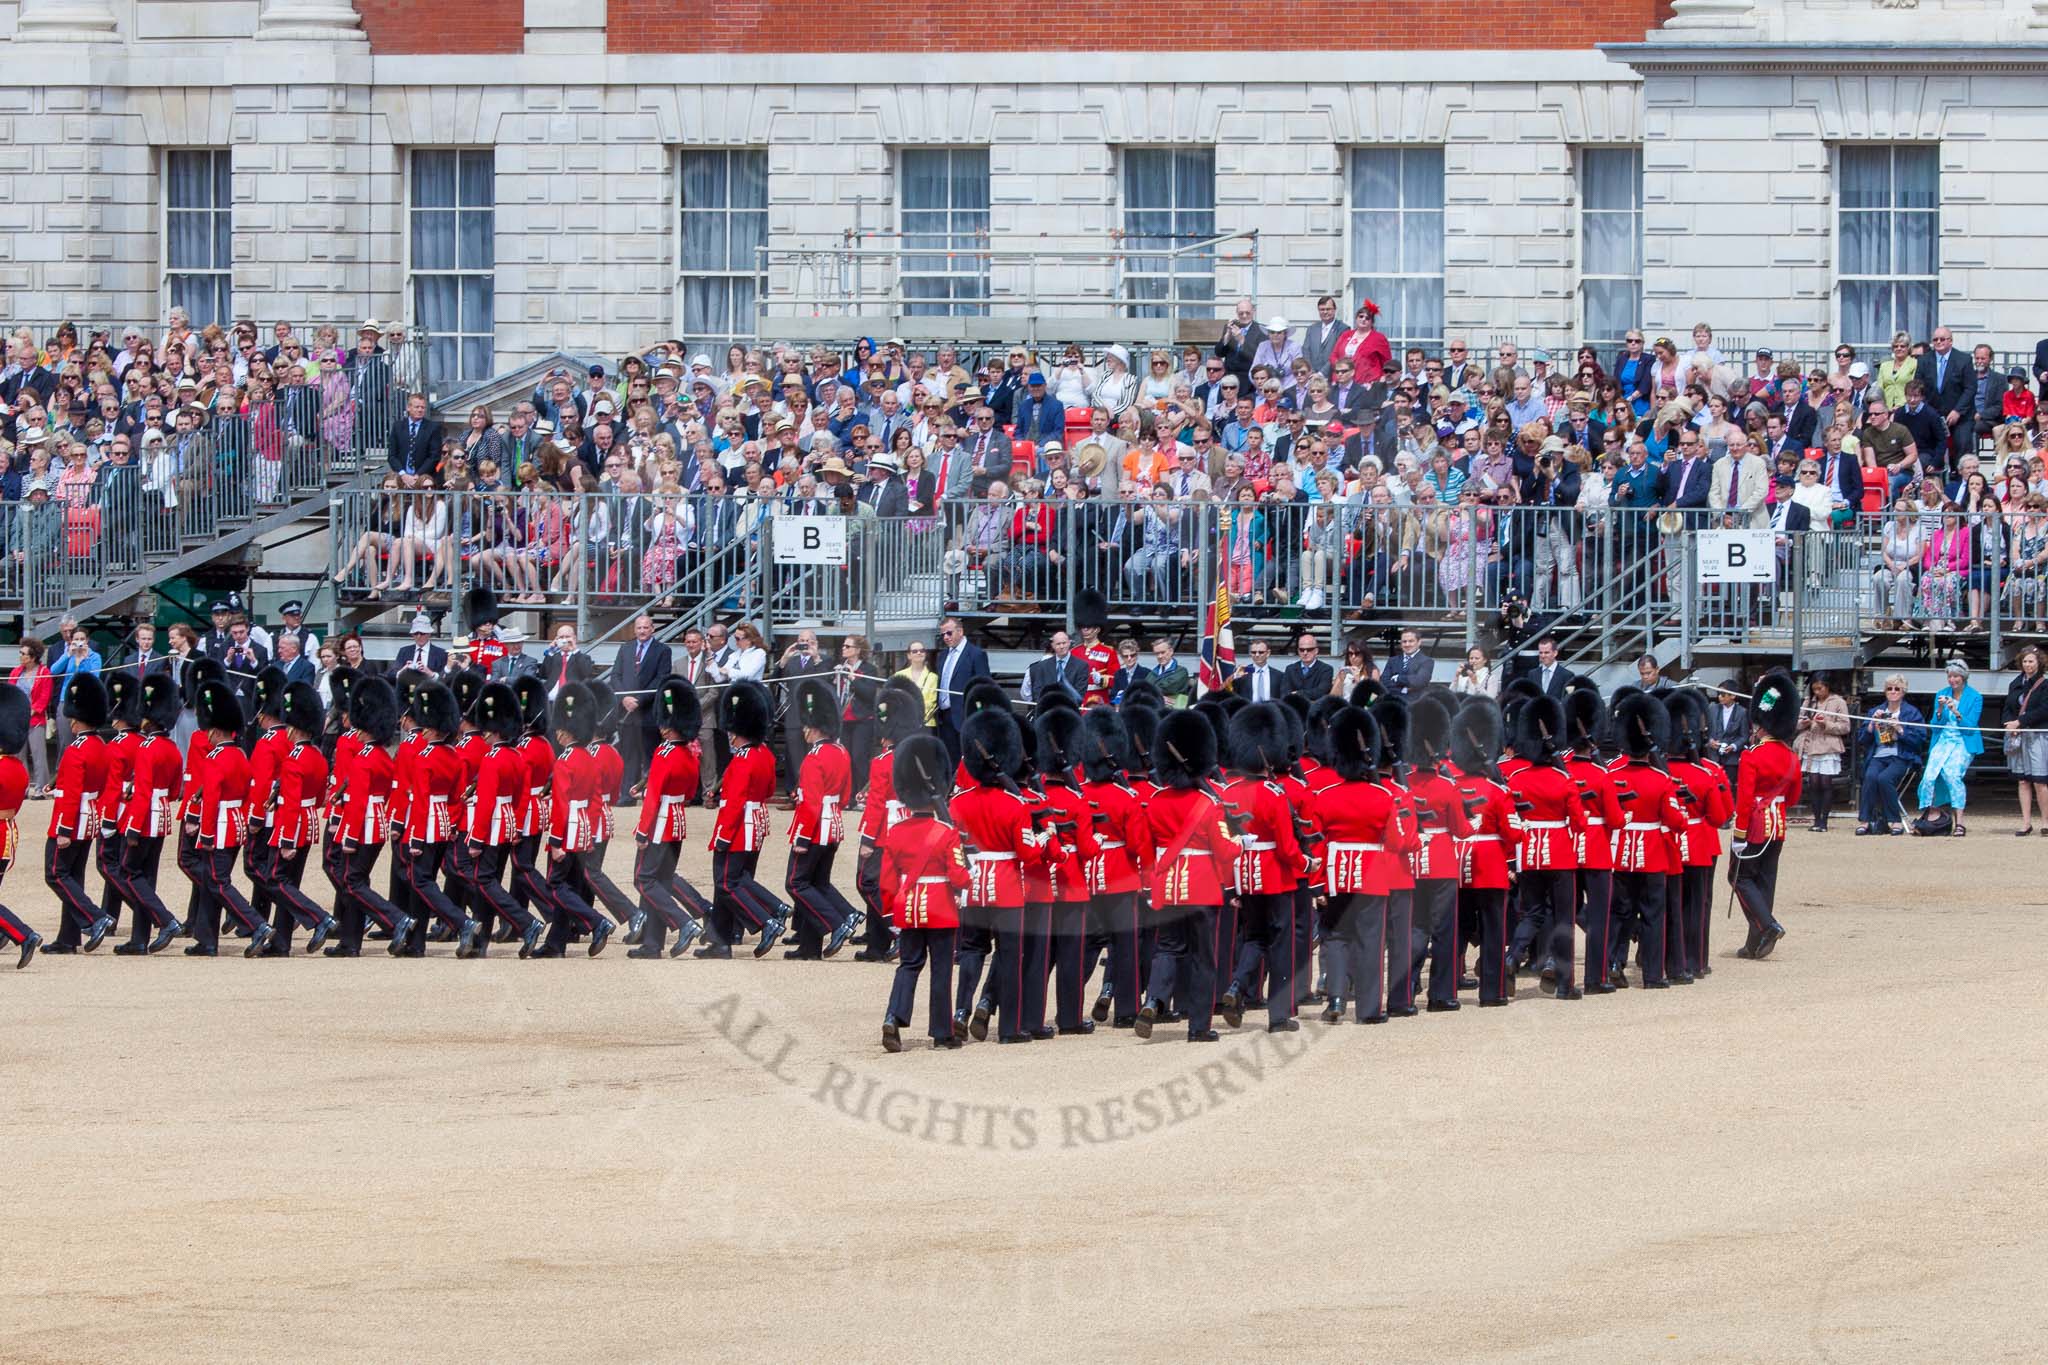 The Colonel's Review 2013: The Escort Tto the Colour performing a 90-degree-turn..
Horse Guards Parade, Westminster,
London SW1,

United Kingdom,
on 08 June 2013 at 11:22, image #548